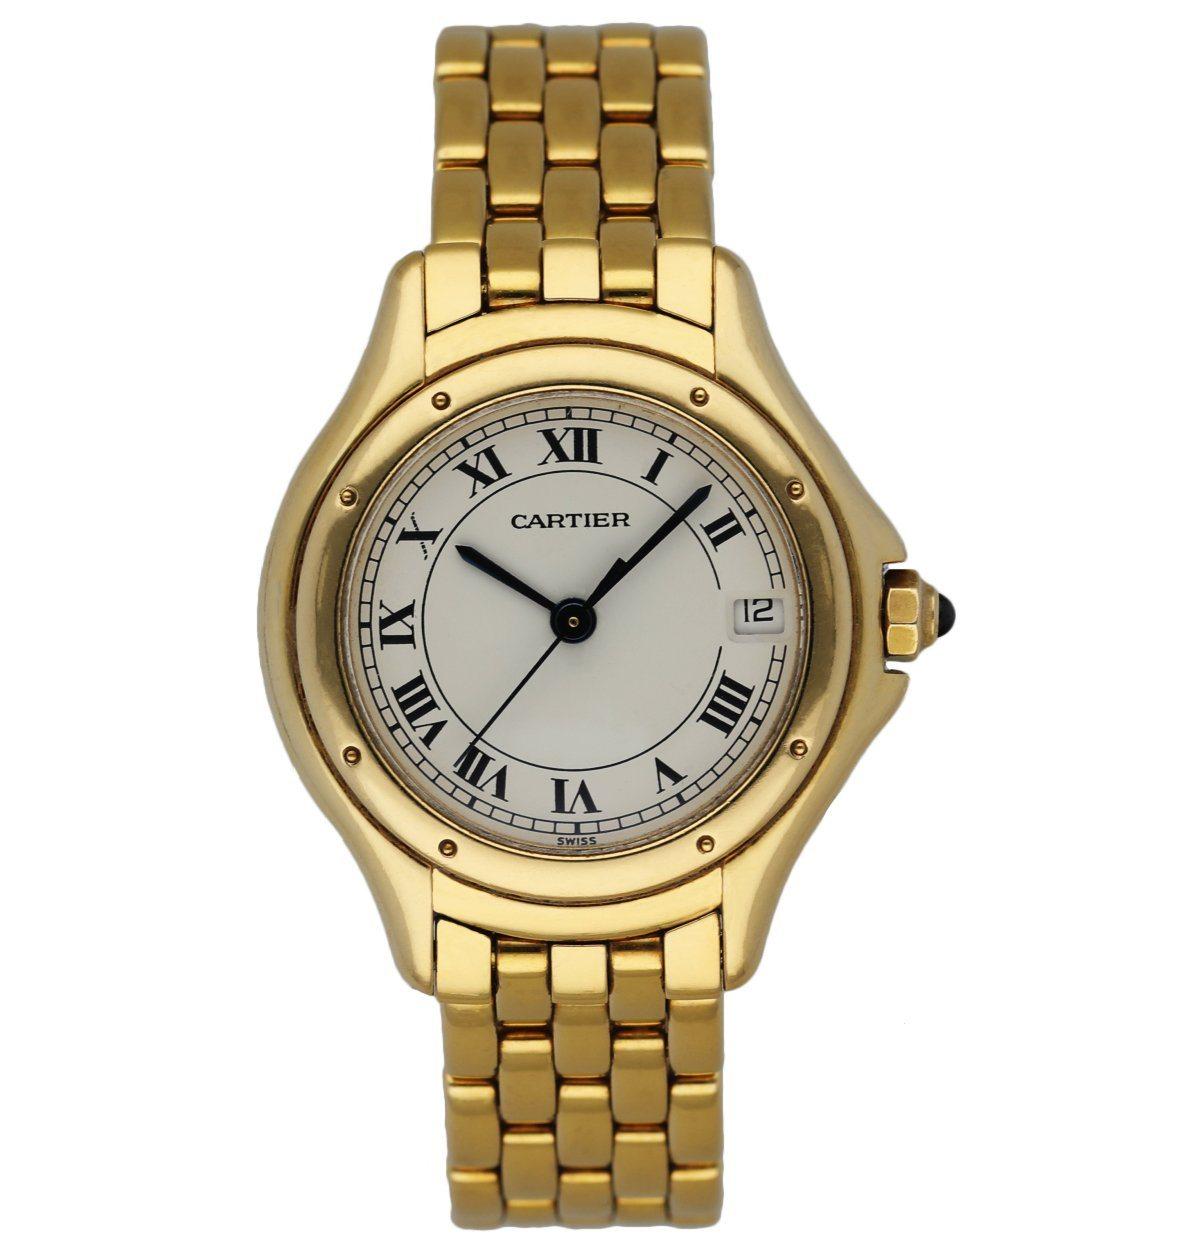 Cartier cougar Panthere Ladies Watch. 24mm 18k Yellow gold case. 18K Yellow Gold smooth bezel. Off-White dial with Blue steel hands and Roman numeral hour markers.Minute markers on the outer dial. Date display at 3 o'clock position. 18K Yellow Gold